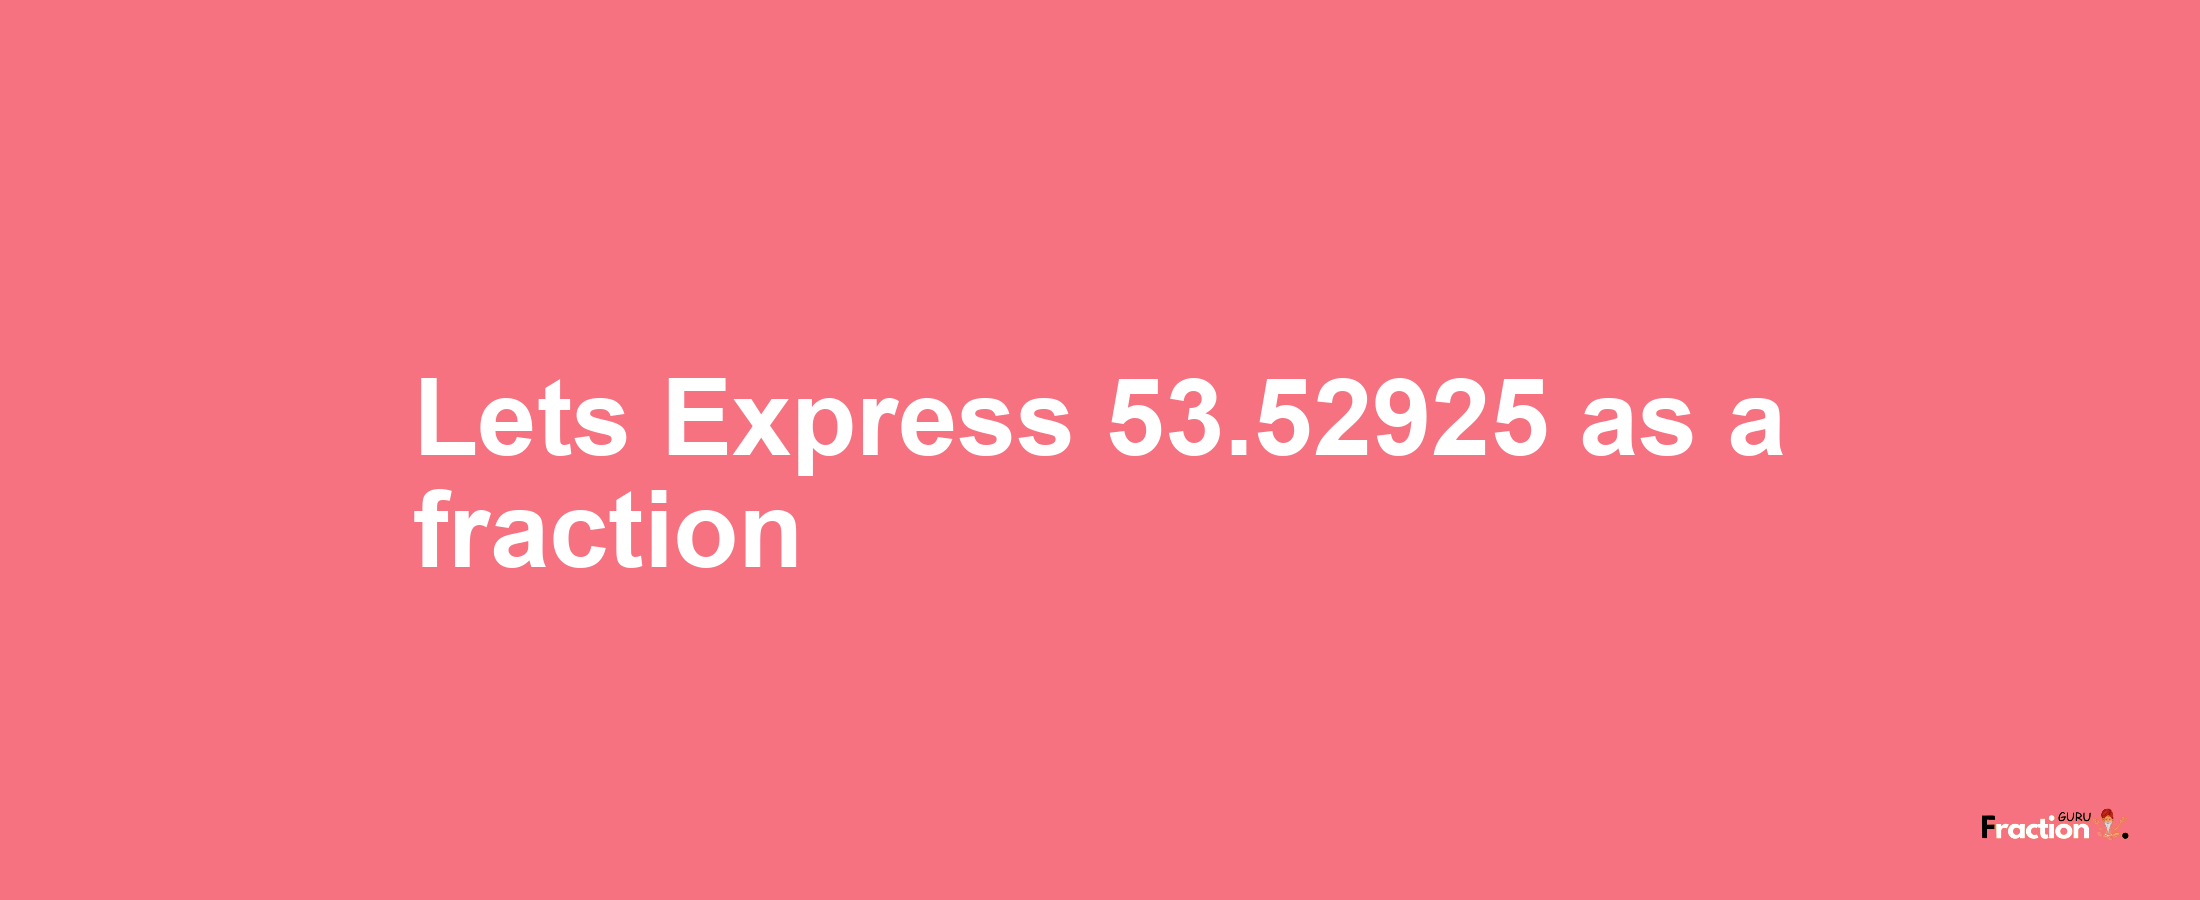 Lets Express 53.52925 as afraction